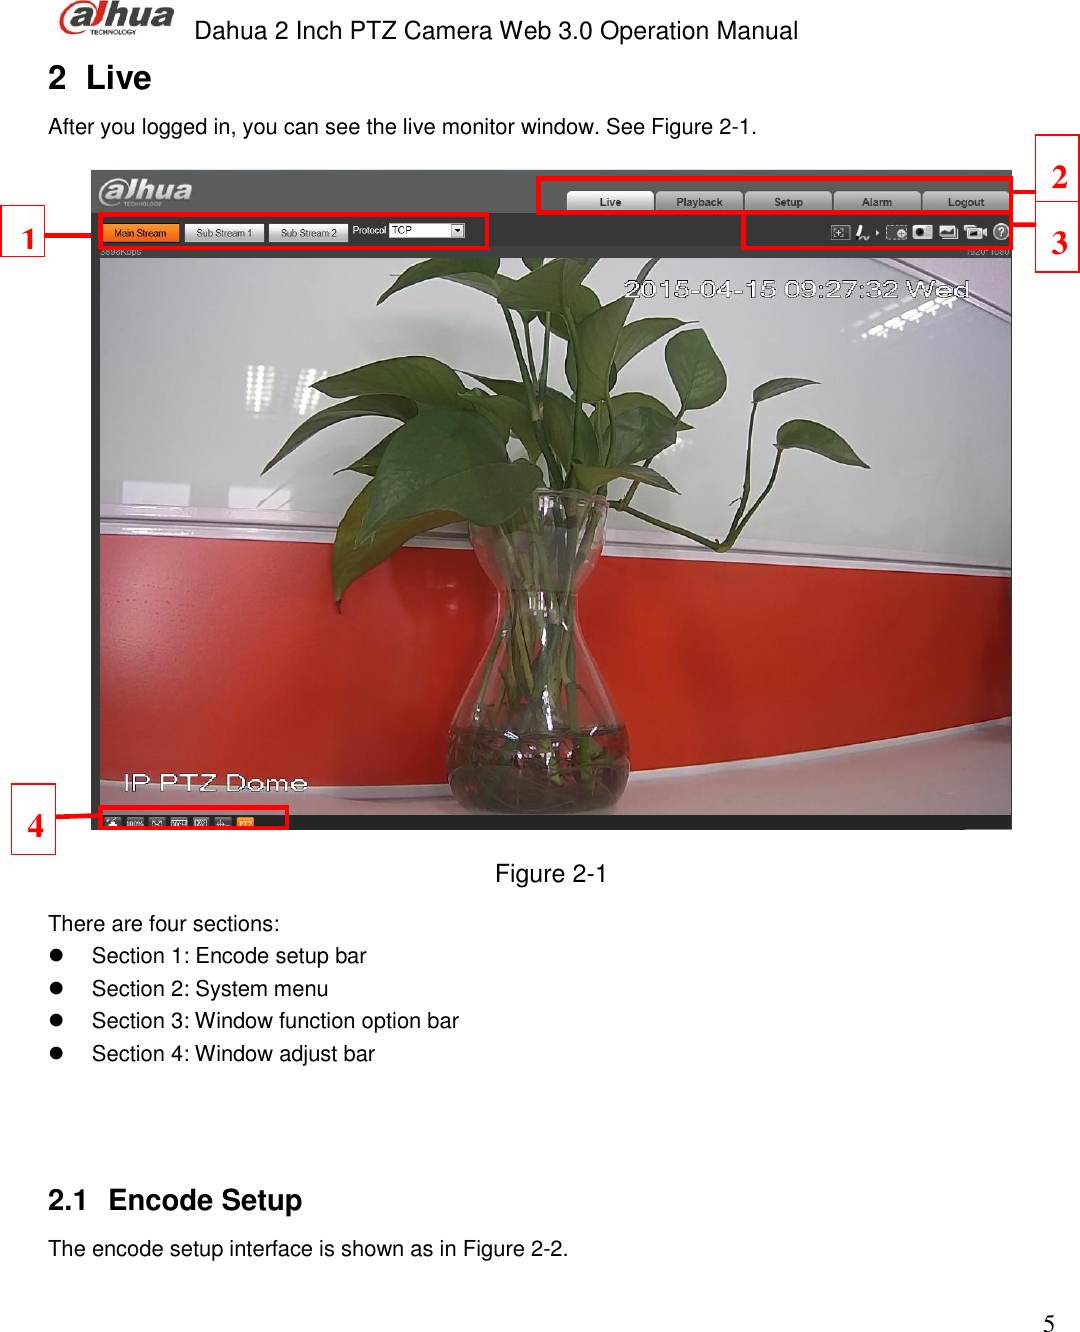  Dahua 2 Inch PTZ Camera Web 3.0 Operation Manual                                                                             5 2  Live After you logged in, you can see the live monitor window. See Figure 2-1.  Figure 2-1 There are four sections:    Section 1: Encode setup bar   Section 2: System menu    Section 3: Window function option bar   Section 4: Window adjust bar     2.1  Encode Setup  The encode setup interface is shown as in Figure 2-2.     2 1 3 4 